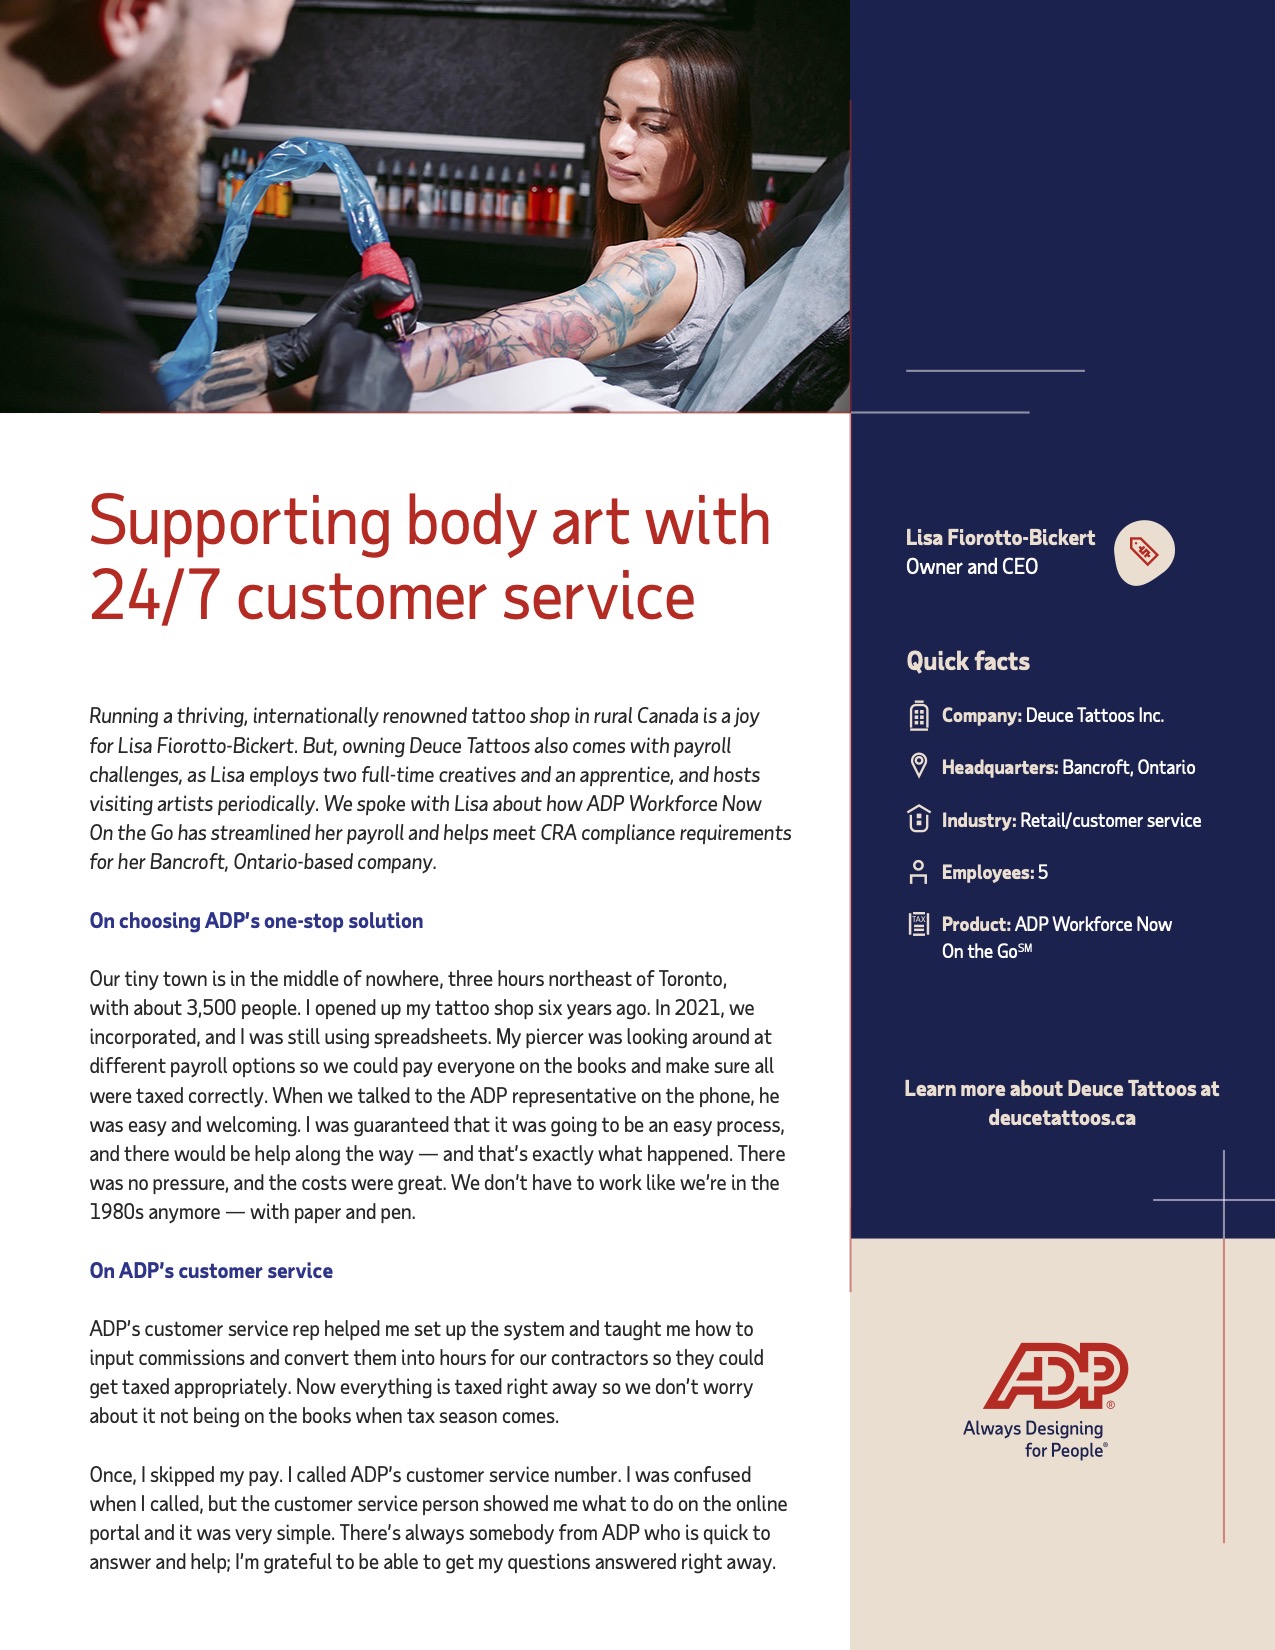 Supporting body art with 24/7 customer service